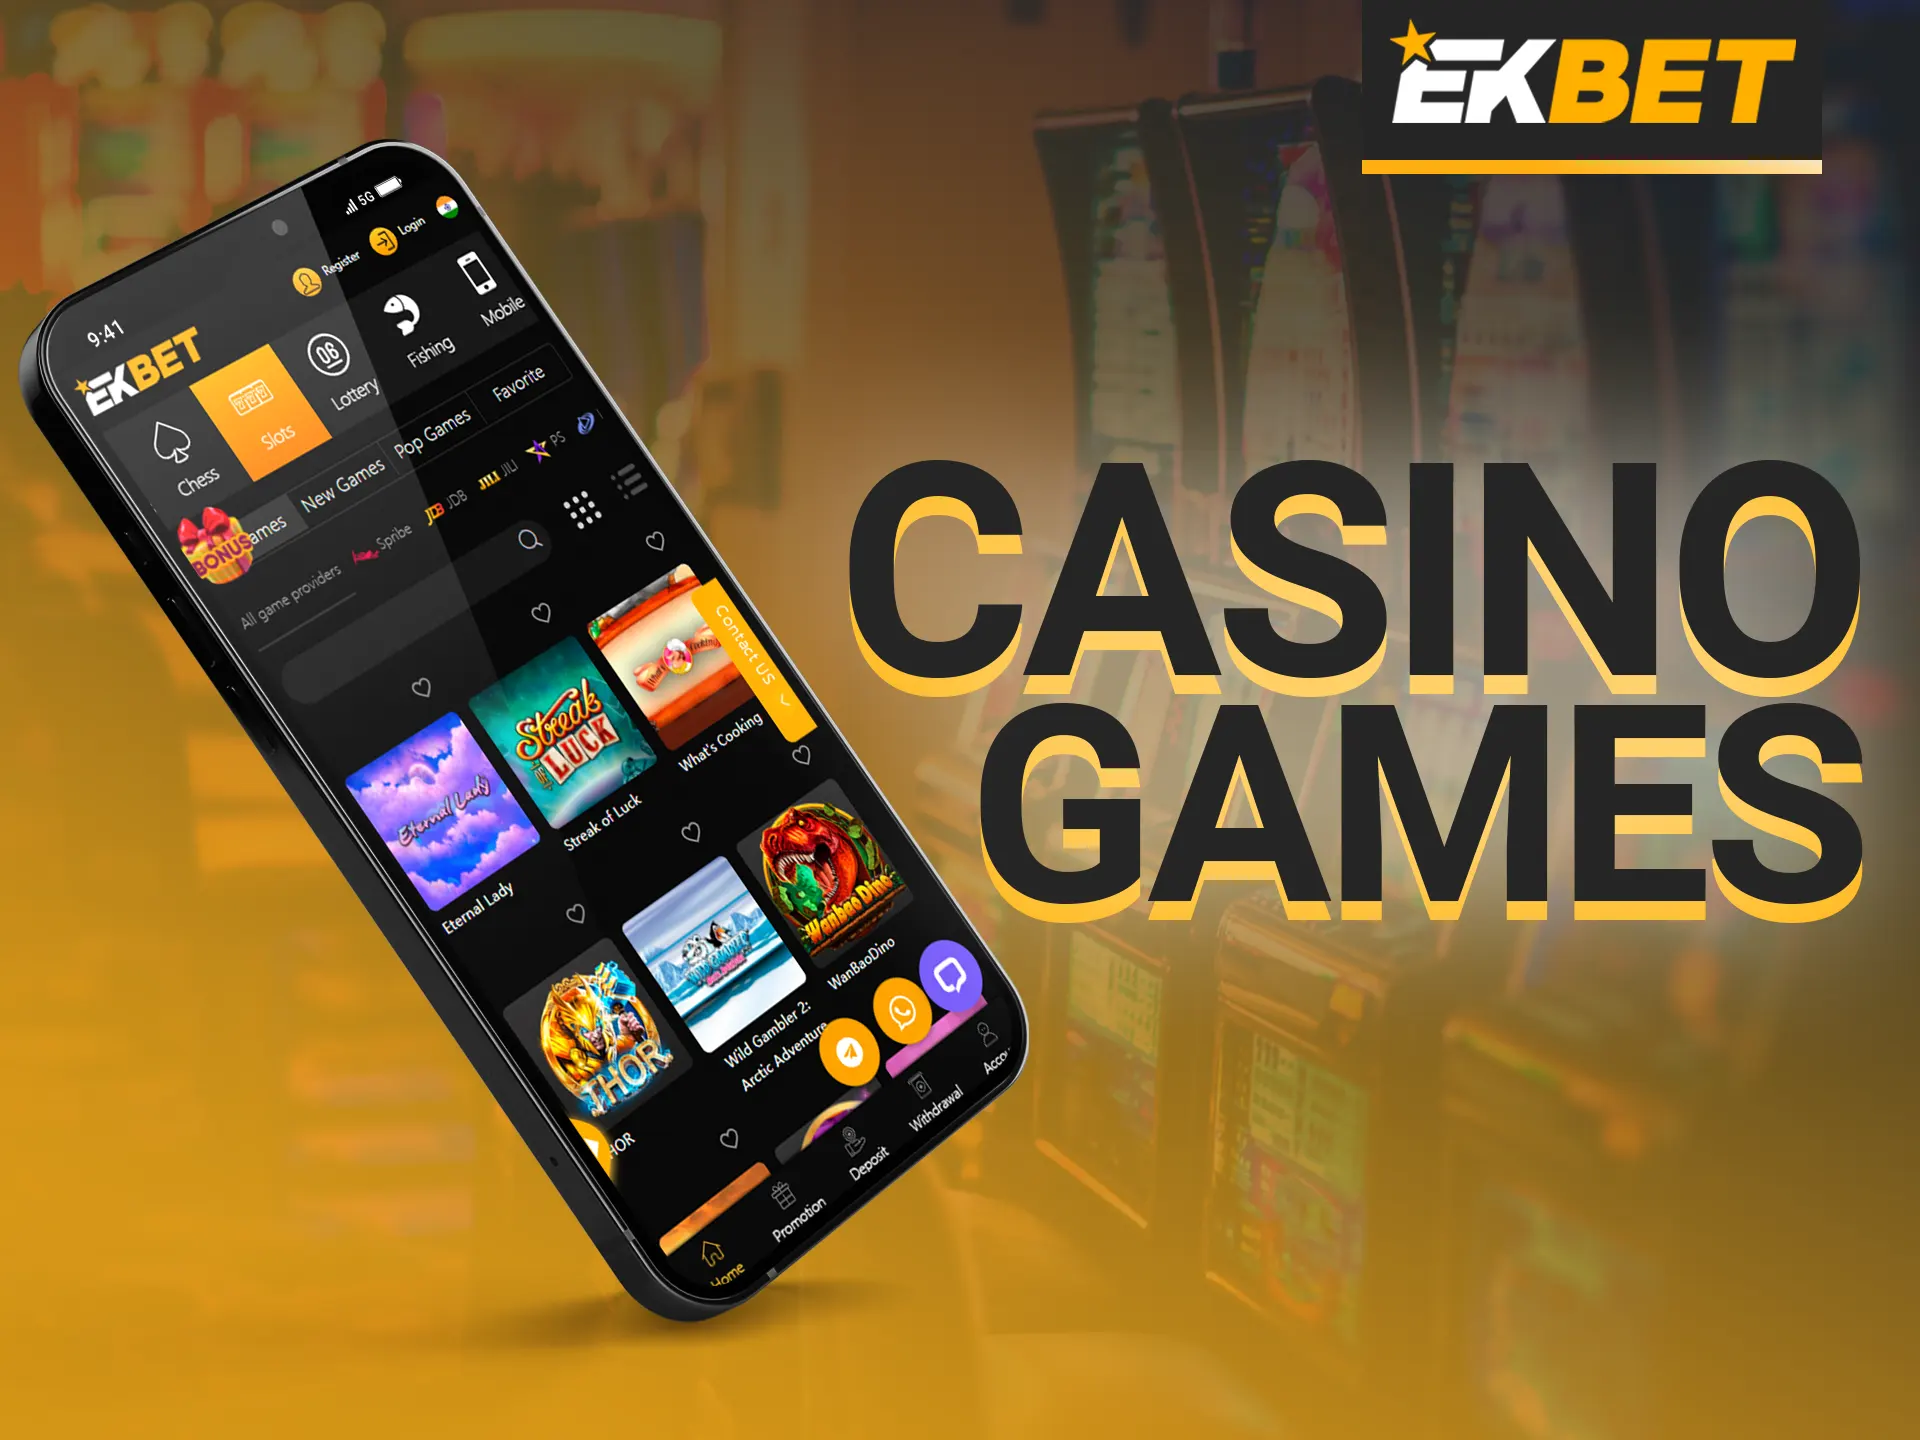 Check out some of the most popular EKbet casino games.